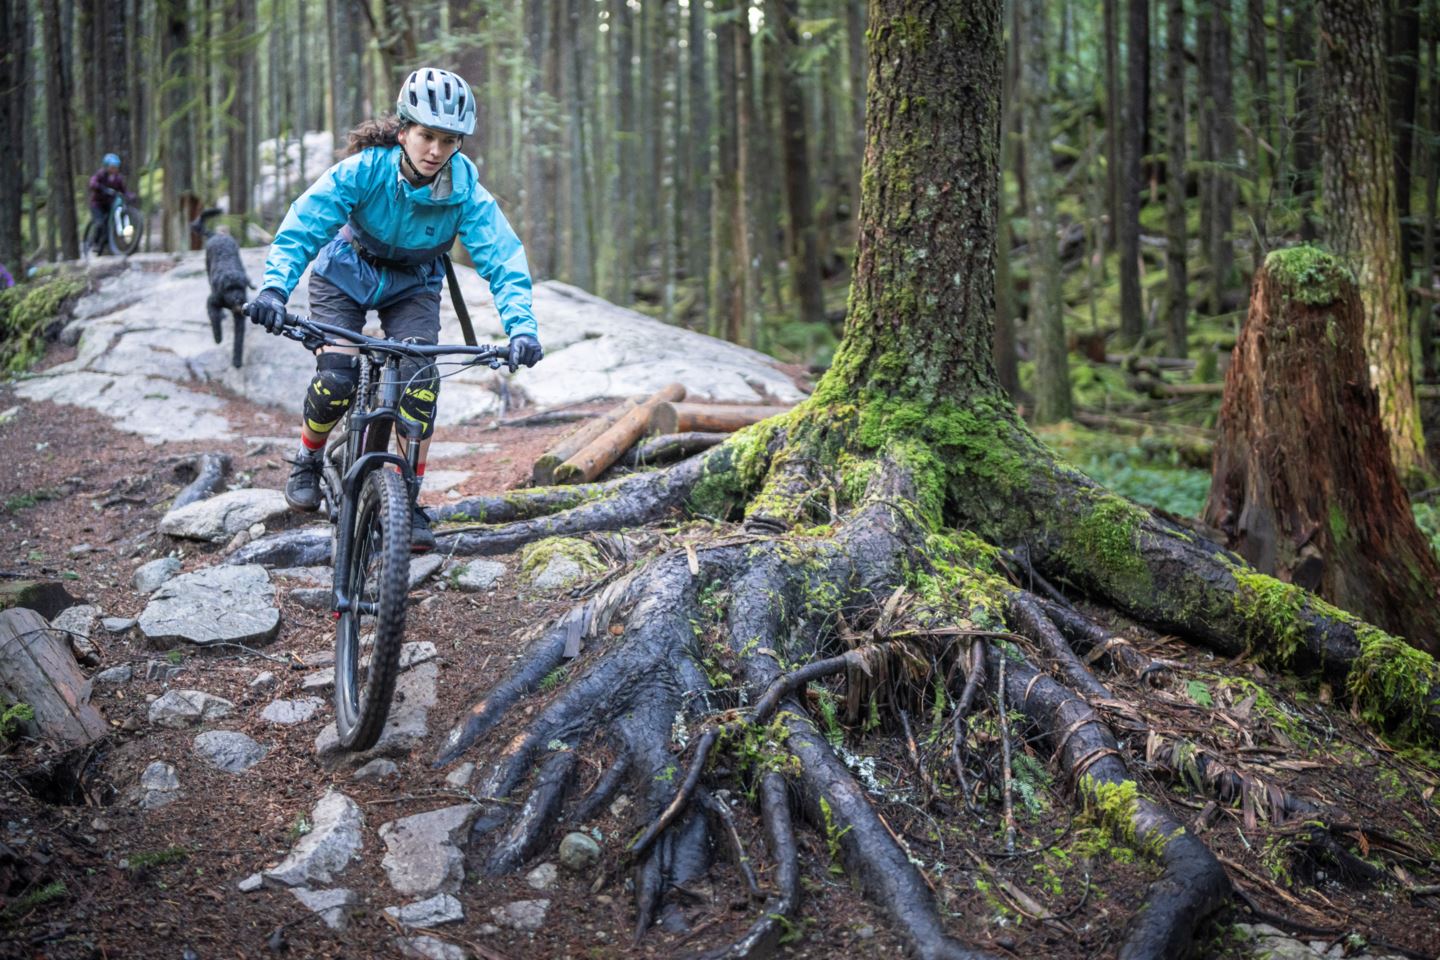 Angela Preise navigates a rooty section of trail